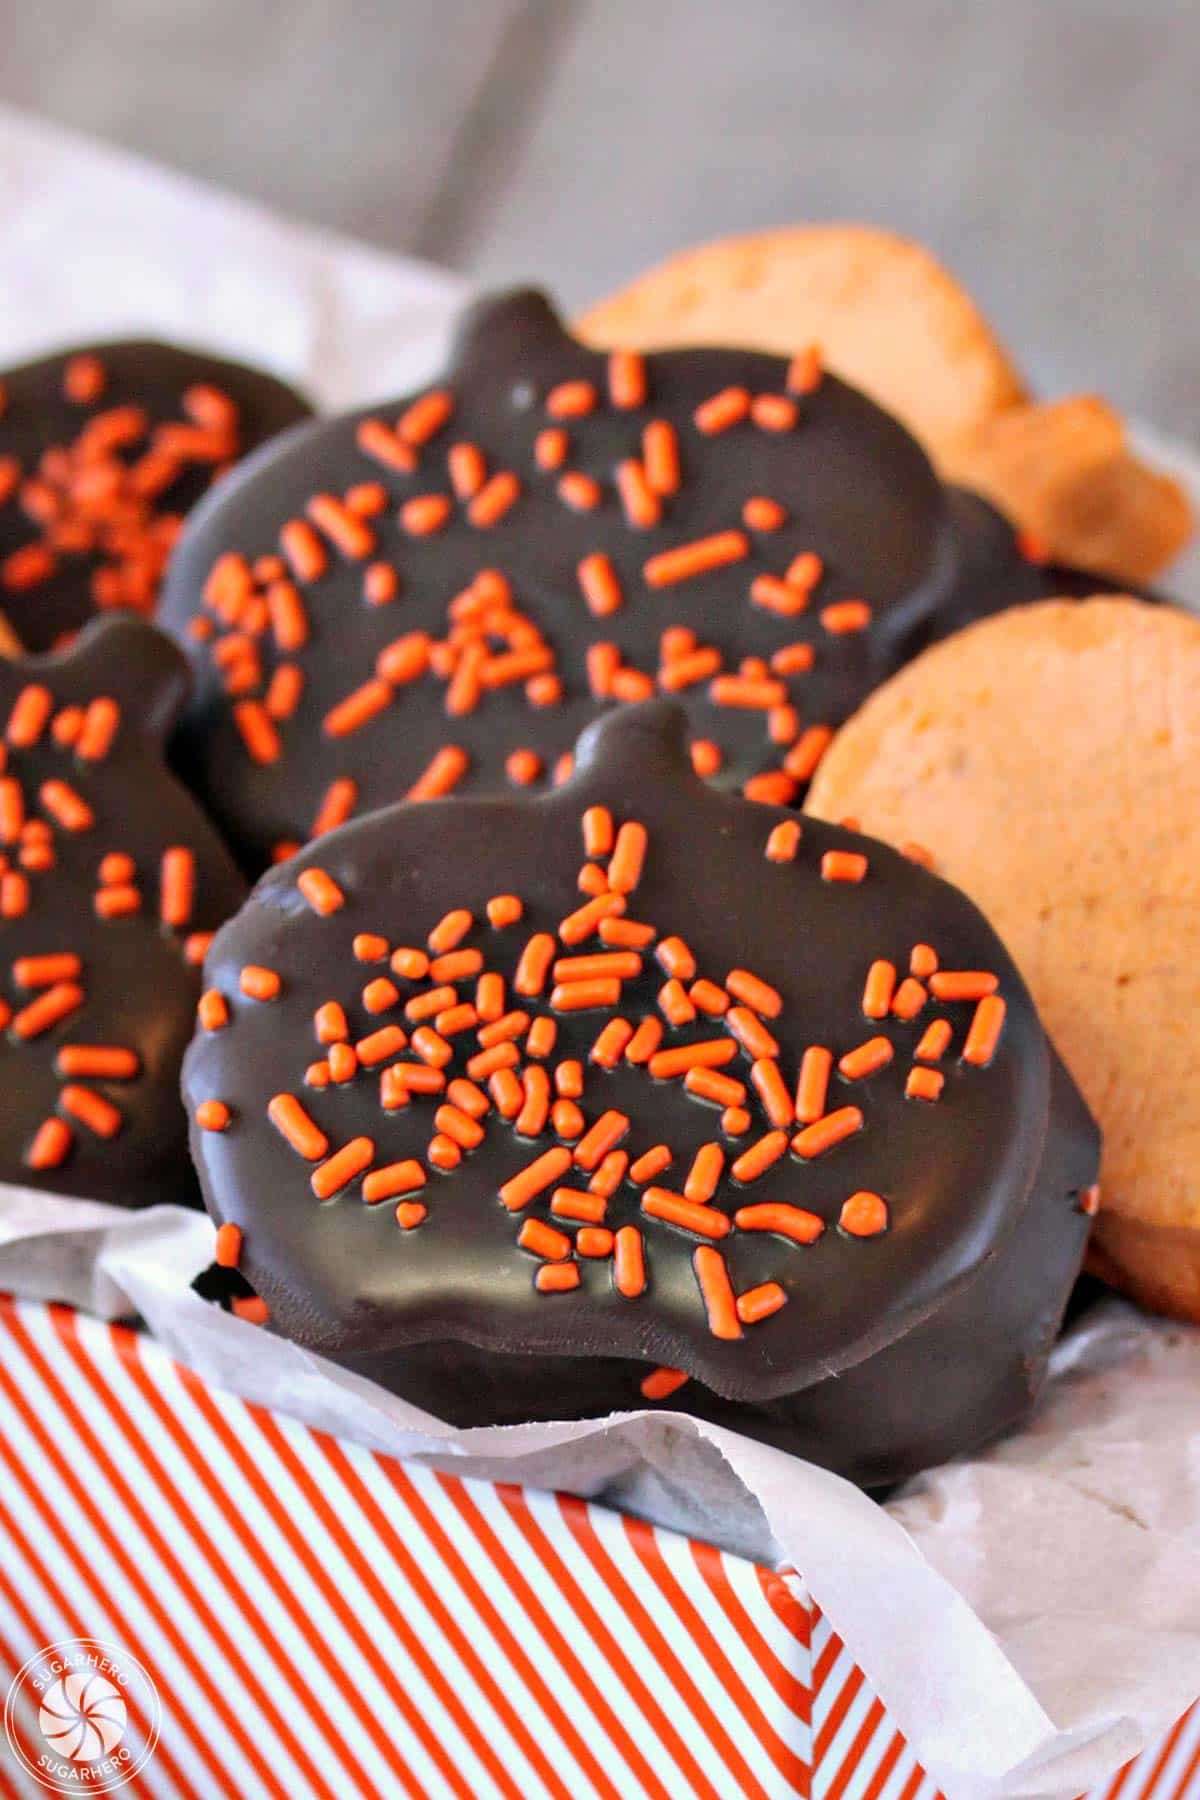 Assortment of Pumpkin Marshmallows, some dipped in chocolate, in an orange-striped gift box.